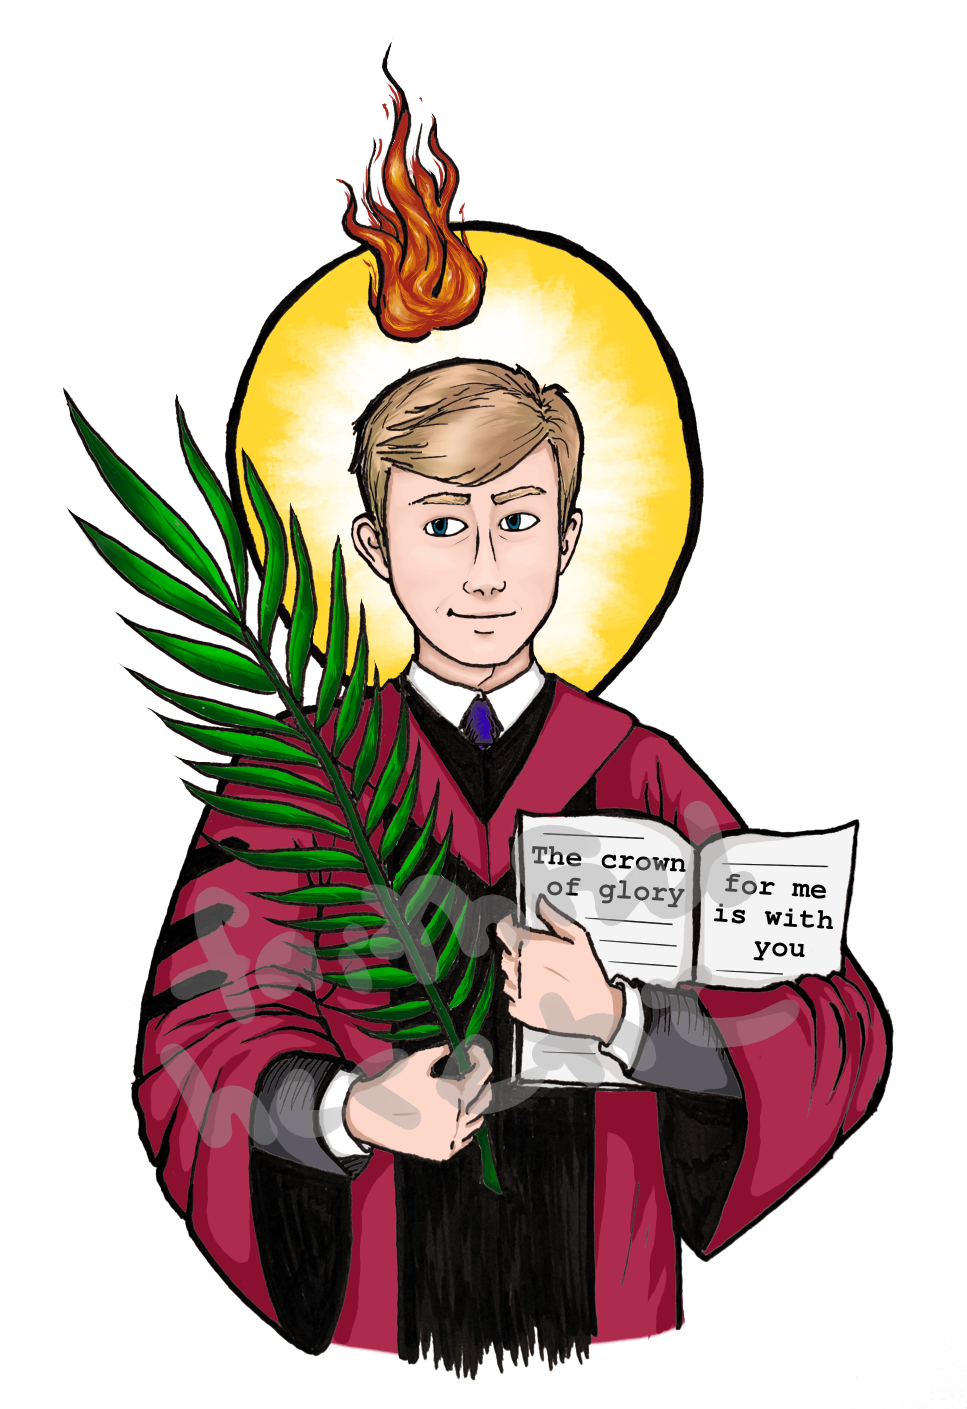 a slender blond man in academic robes carrying a palm frond and a book